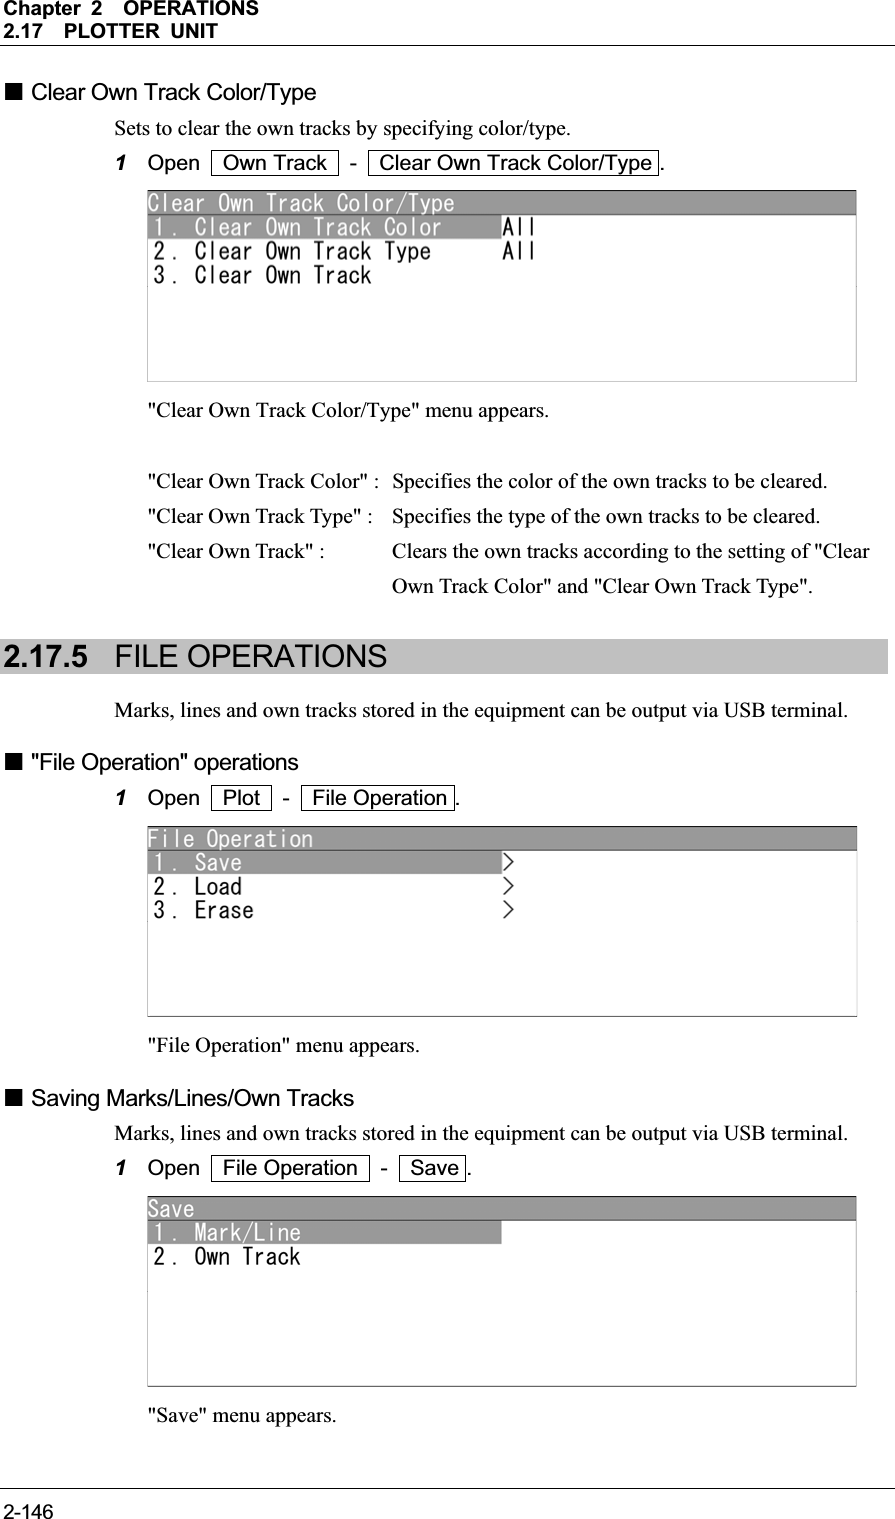 Chapter 2OPERATIONS2.17PLOTTER UNIT 2-146 Clear Own Track Color/Type Sets to clear the own tracks by specifying color/type. 1Open  Own Track  -  Clear Own Track Color/Type . &quot;Clear Own Track Color/Type&quot; menu appears. &quot;Clear Own Track Color&quot; :   Specifies the color of the own tracks to be cleared. &quot;Clear Own Track Type&quot; :  Specifies the type of the own tracks to be cleared. &quot;Clear Own Track&quot; :  Clears the own tracks according to the setting of &quot;Clear Own Track Color&quot; and &quot;Clear Own Track Type&quot;. 2.17.5 FILE OPERATIONS Marks, lines and own tracks stored in the equipment can be output via USB terminal.  &quot;File Operation&quot; operations 1Open  Plot  -  File Operation . &quot;File Operation&quot; menu appears.  Saving Marks/Lines/Own Tracks Marks, lines and own tracks stored in the equipment can be output via USB terminal. 1Open  File Operation  -  Save . &quot;Save&quot; menu appears. 